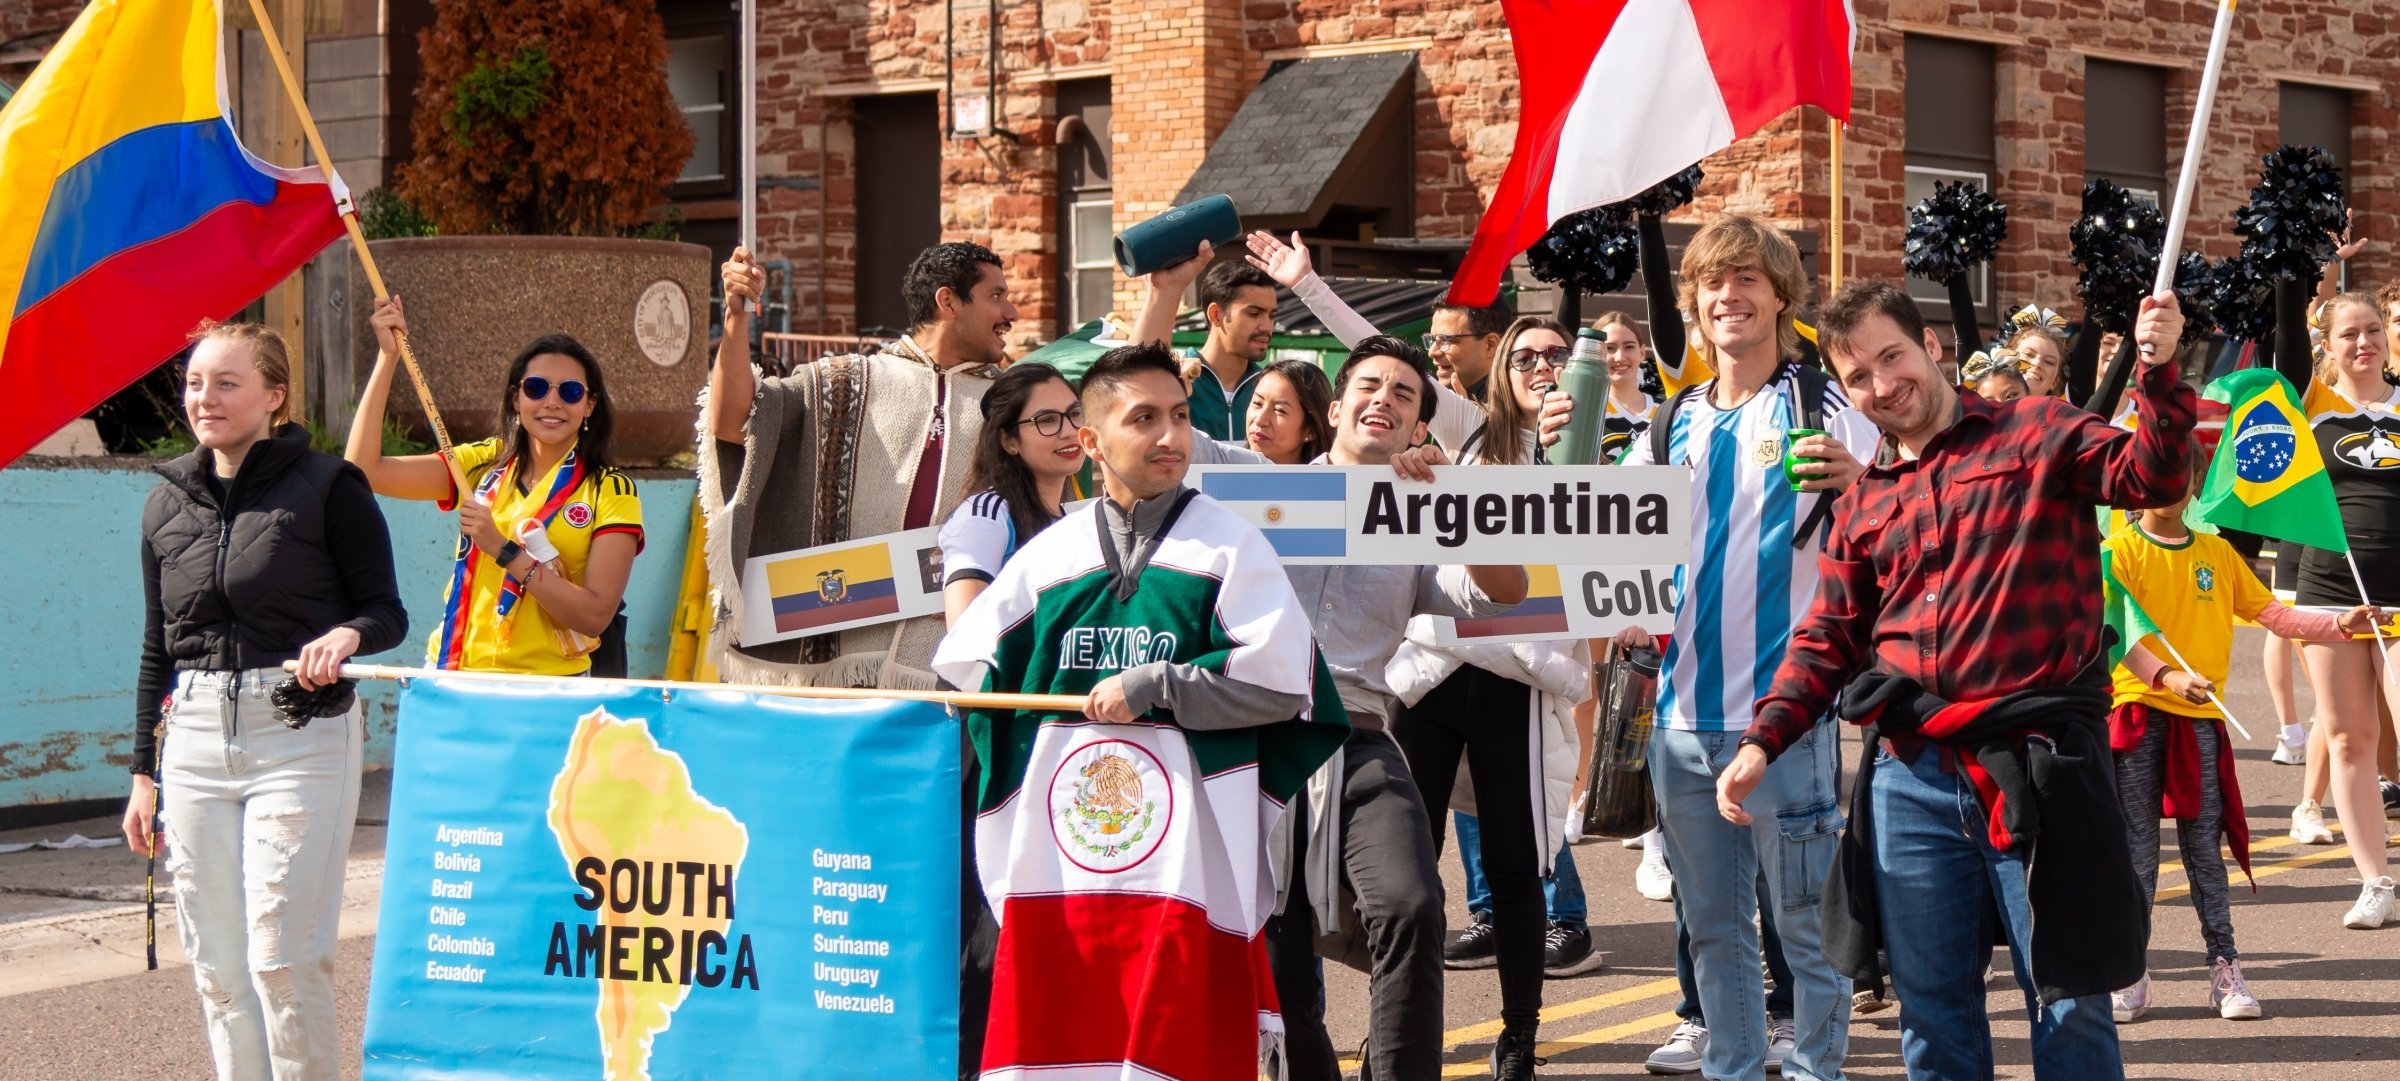 Student walking in Parade of National holding banners that state South America, Argentina, Colombia, and Ecuador